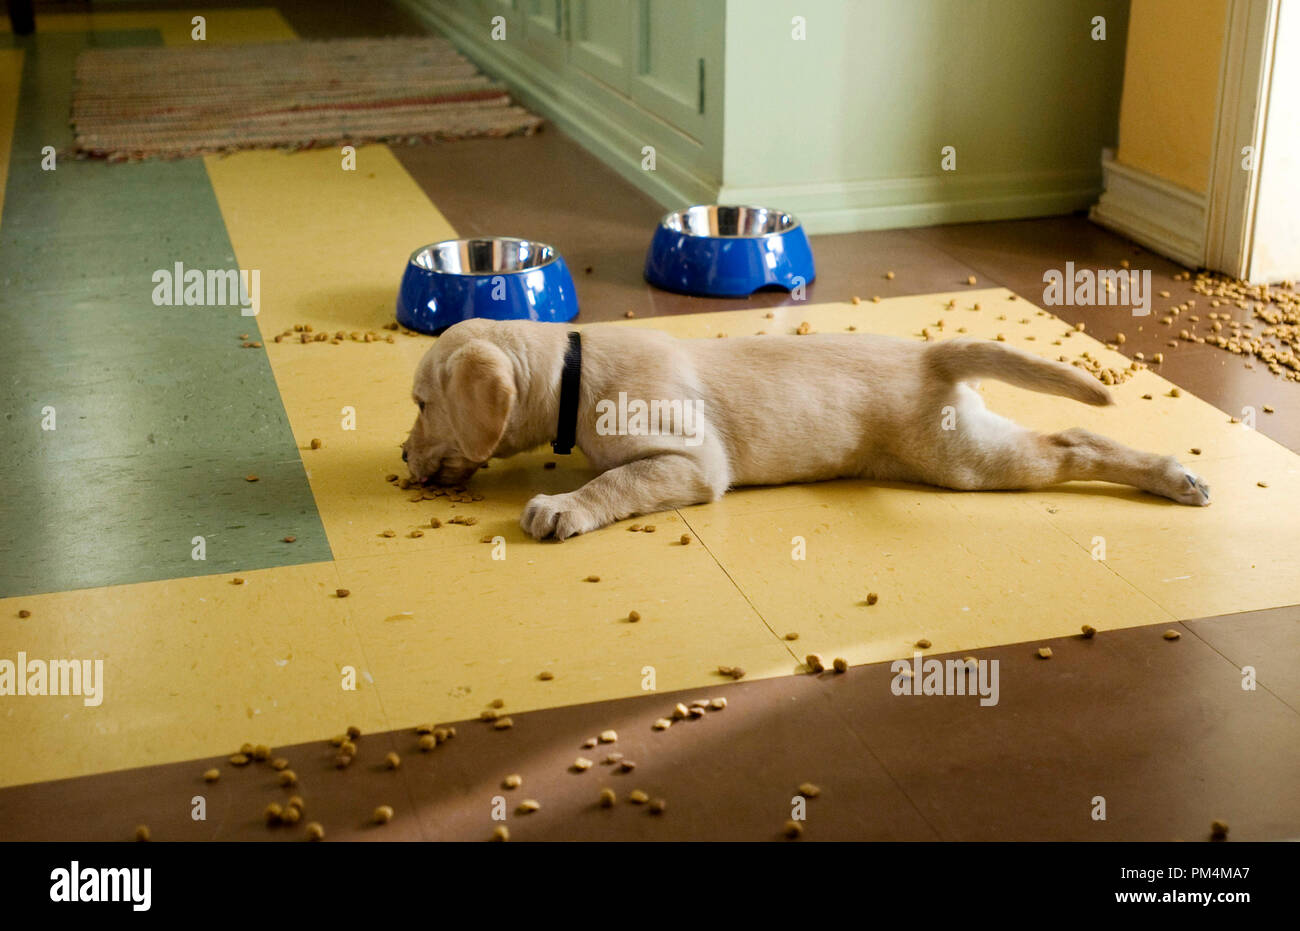 Even a simple meal turns into a disaster area when Marley’s involved. Stock Photo